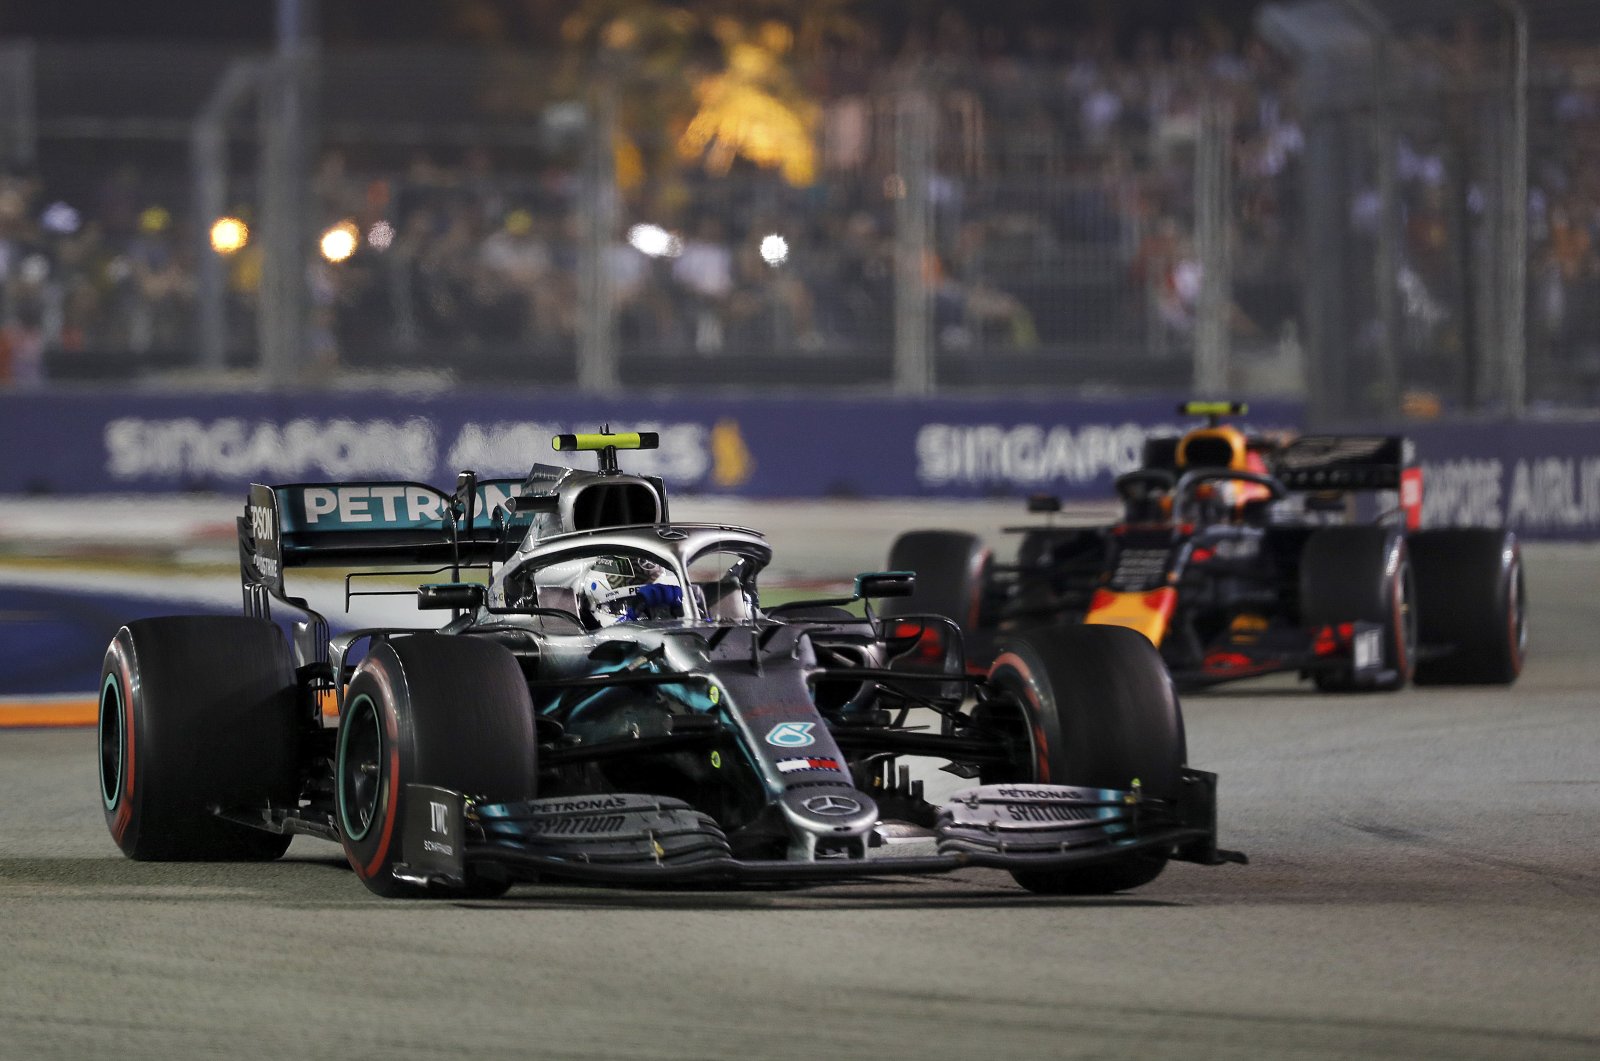 Mercedes driver Valtteri Bottas drives ahead of Red Bull's Alexander Albon during the Singapore Formula One GP in Singapore, Sept. 22, 2019. (AP Photo)